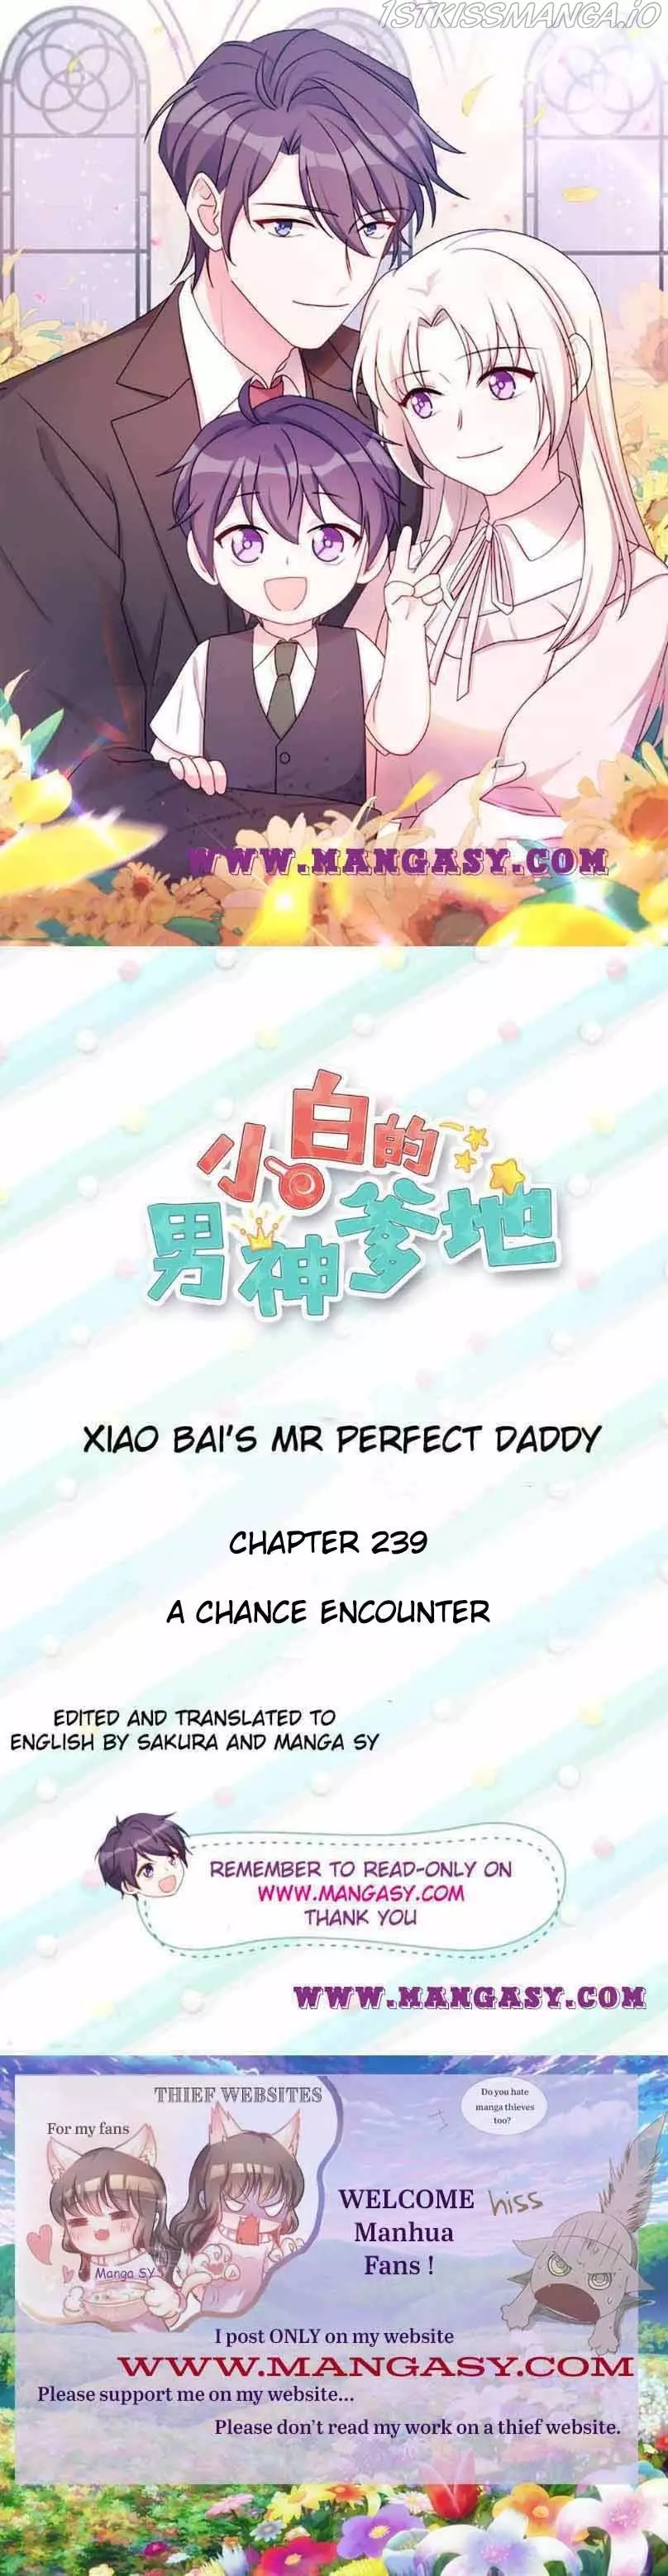 Xiao Bai’S Father Is A Wonderful Person - 239 page 1-7a101ba7